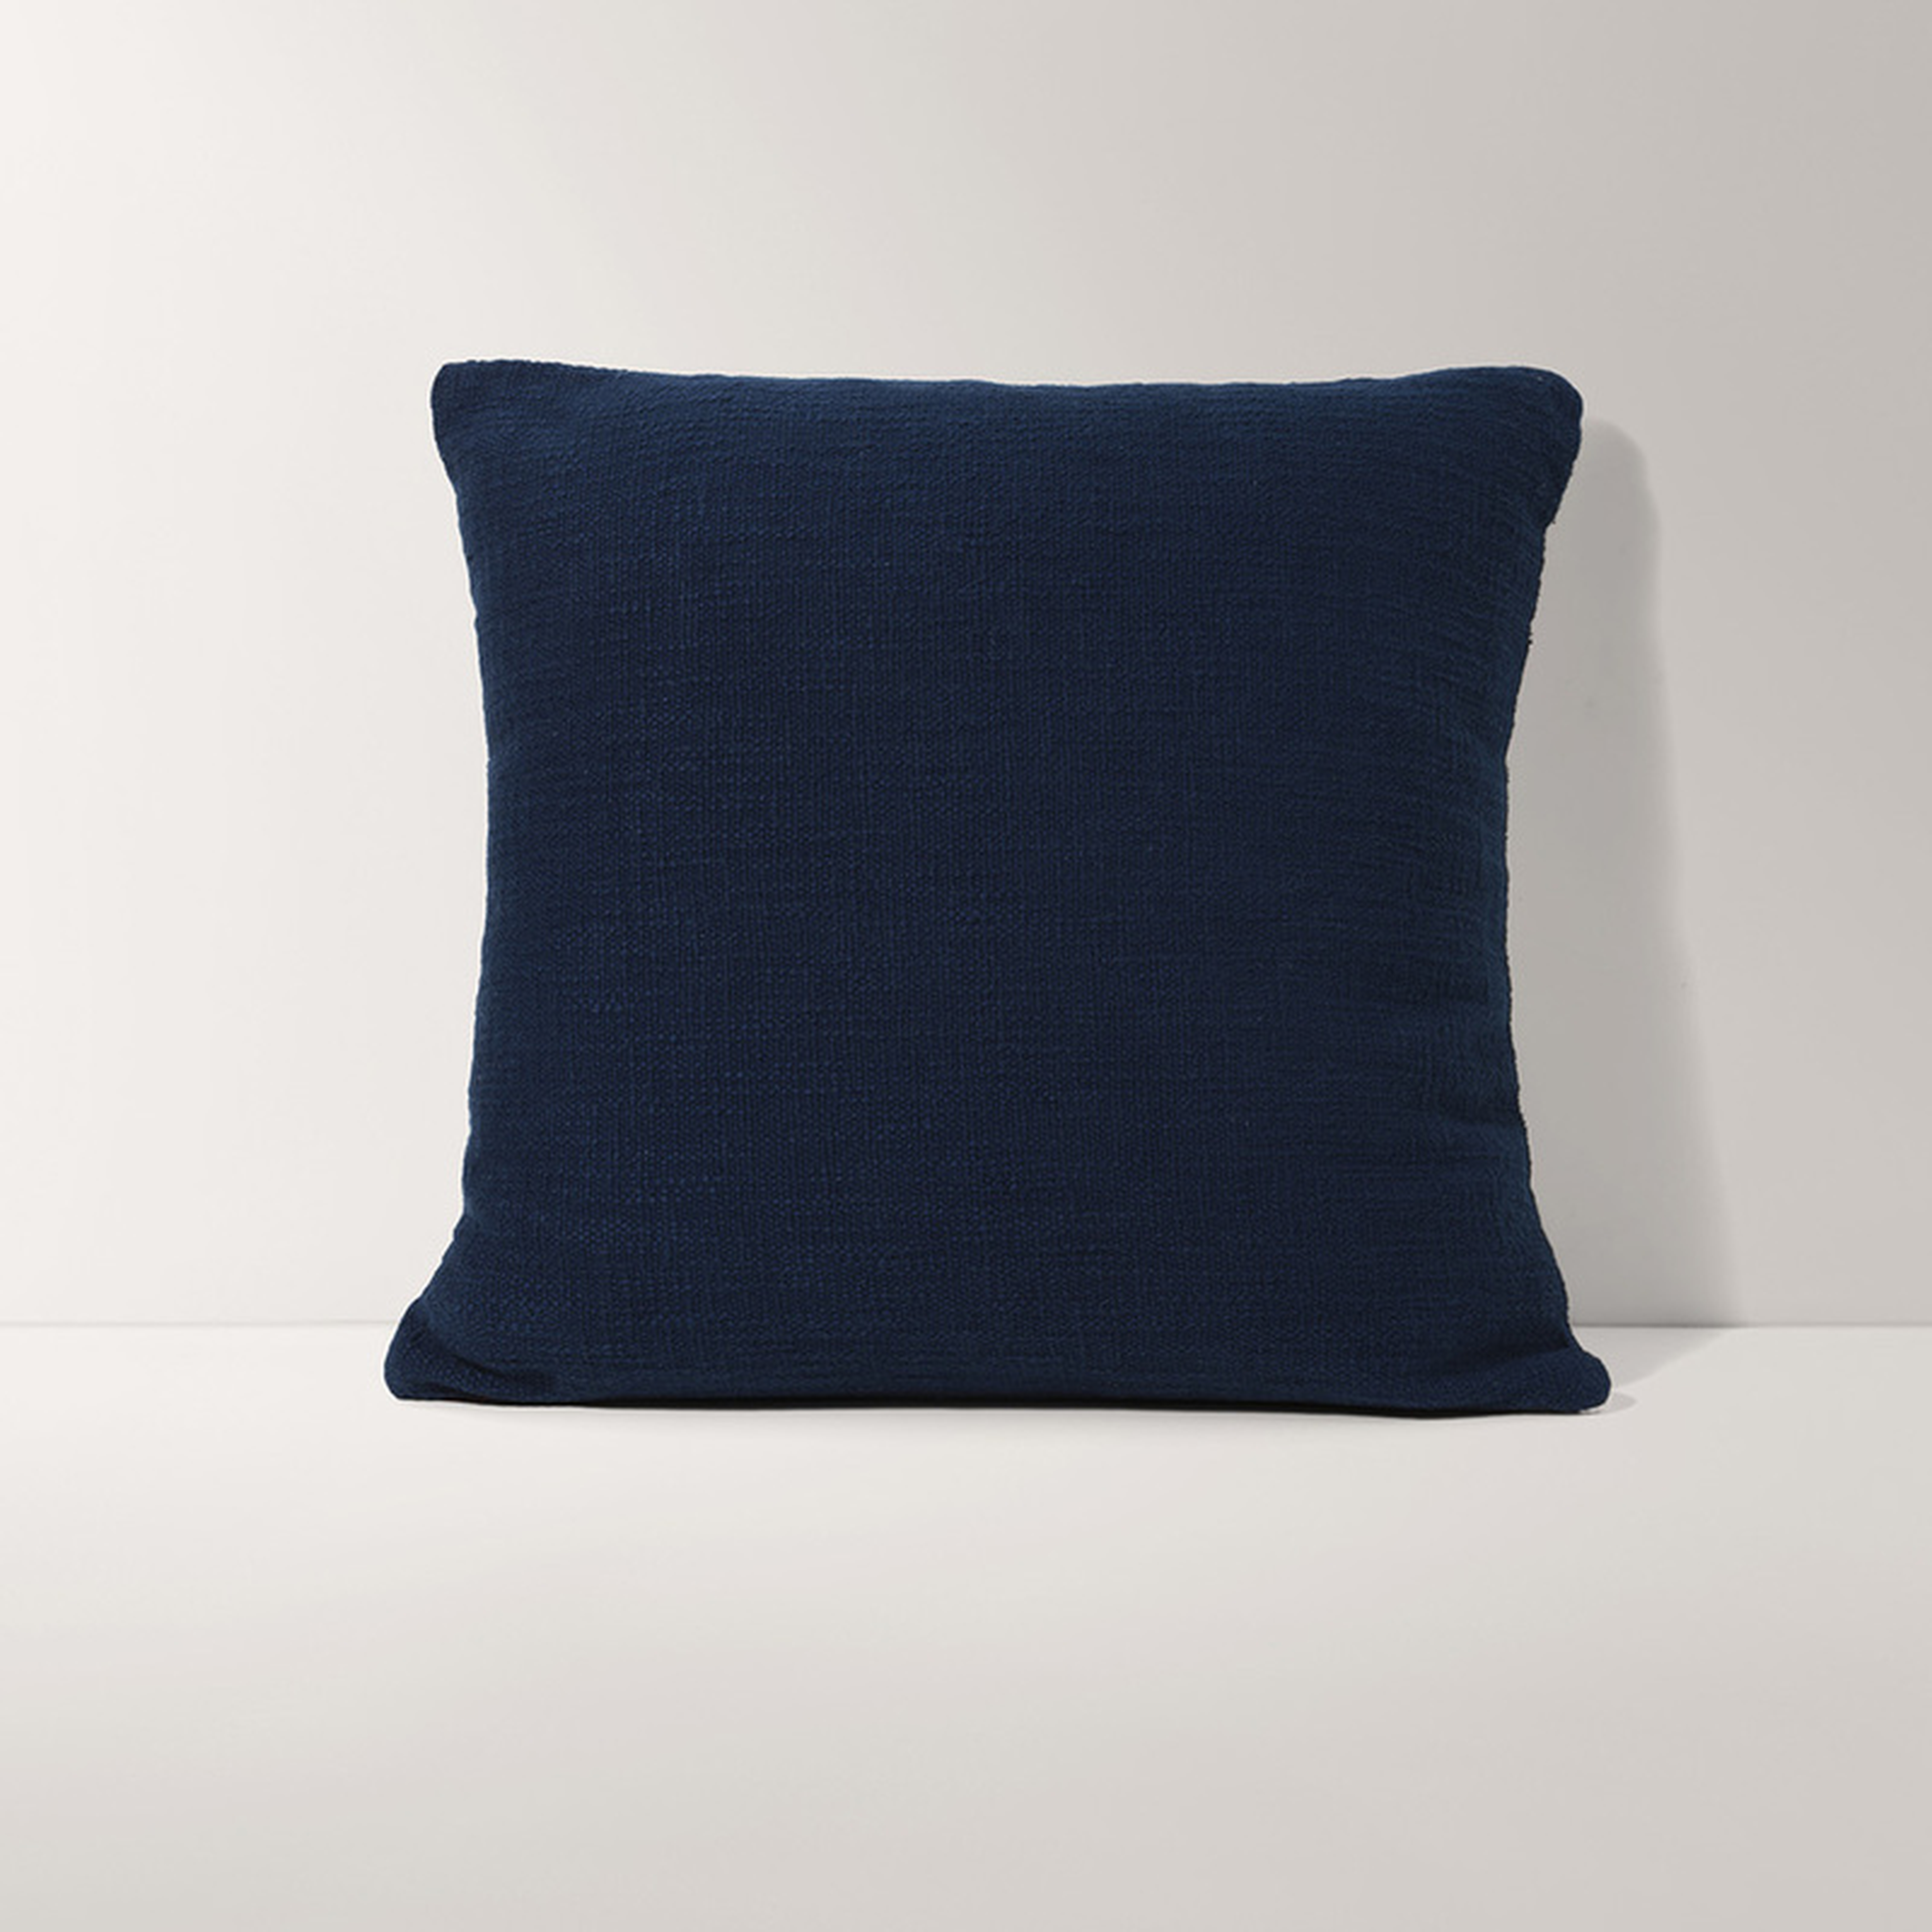 Burrow Navy Blue Square Throw Pillow, Solid Pattern - Decorative Pillows - Burrow